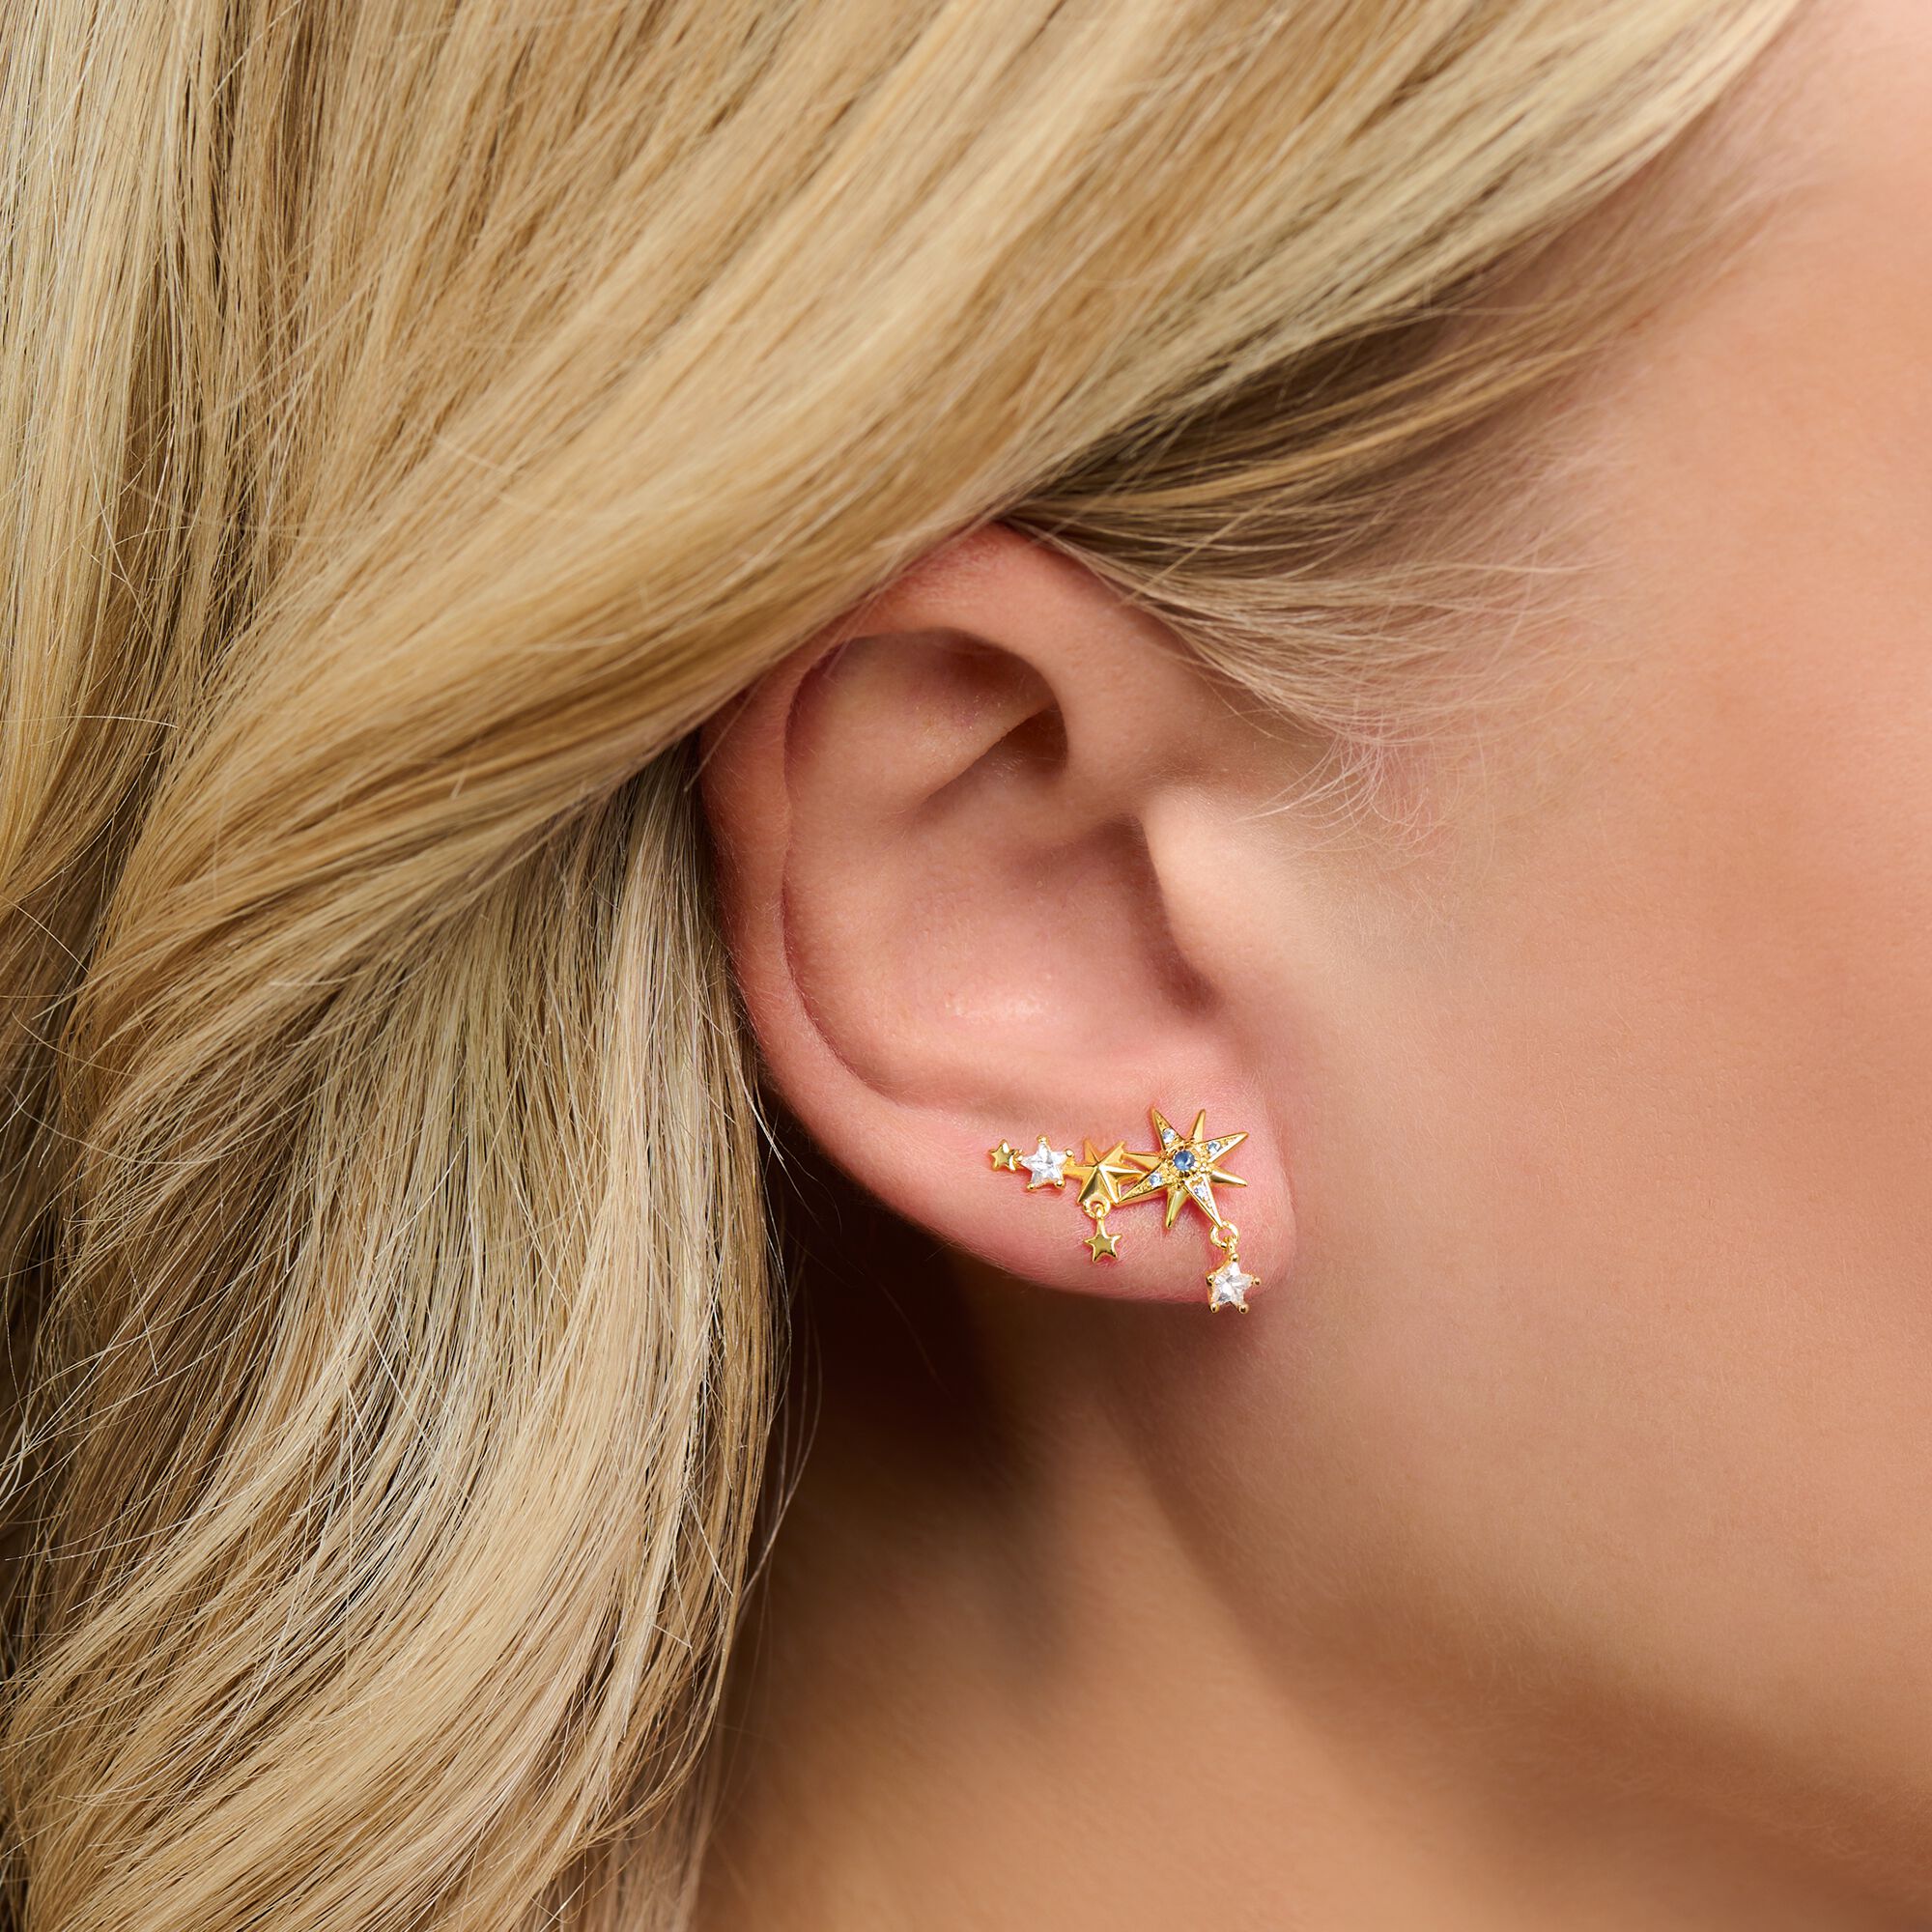 Ear SABO plated gold – yellow stars, THOMAS with climber